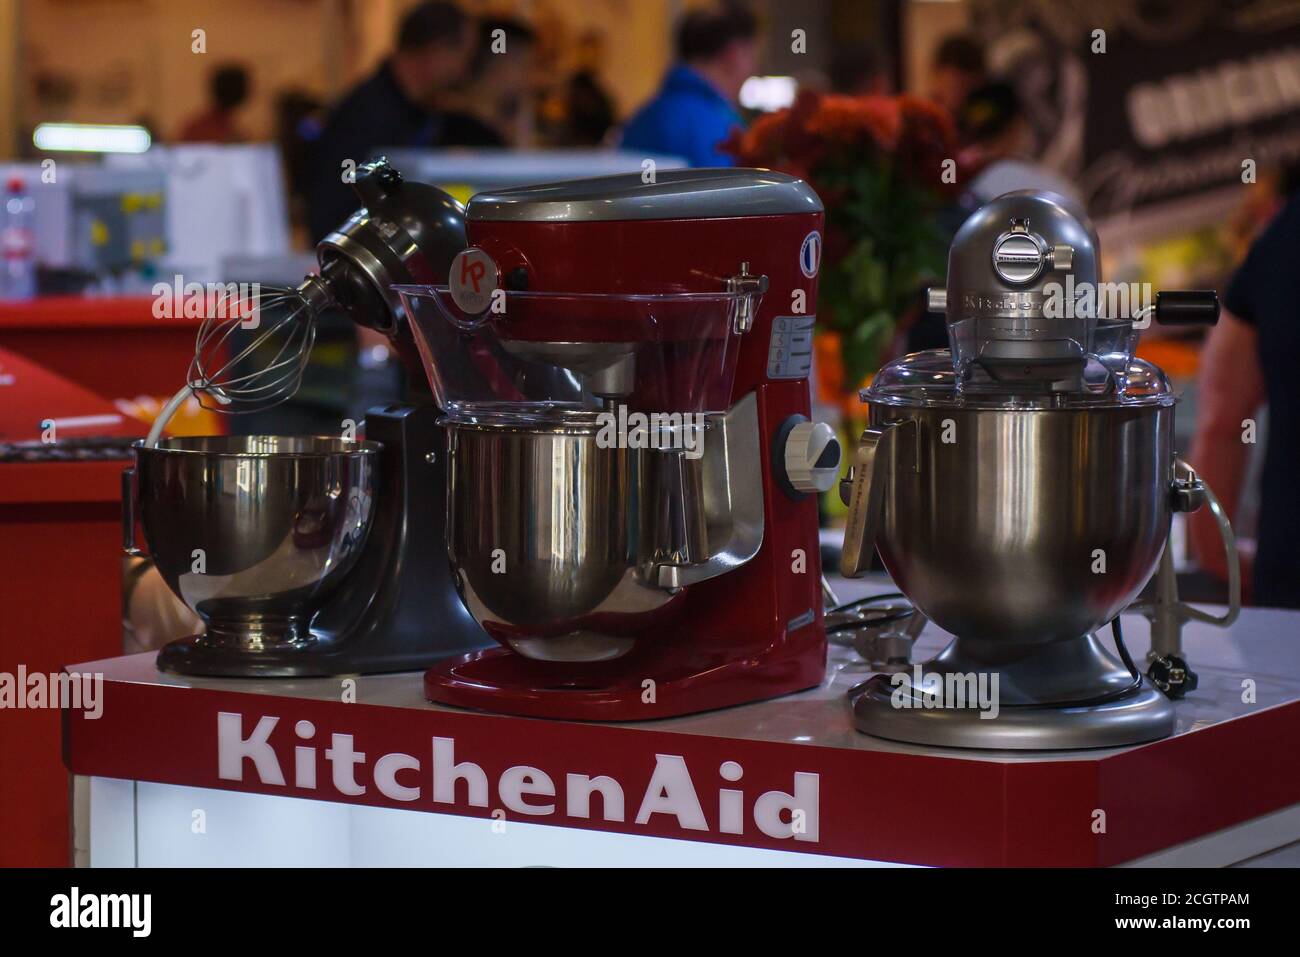 https://c8.alamy.com/comp/2CGTPAM/riga-latvia-12th-september-2020-products-of-kitchenaid-kitchenaid-is-an-american-home-appliance-brand-owned-by-whirlpool-corporation-international-riga-food-2020-exhibition-2CGTPAM.jpg